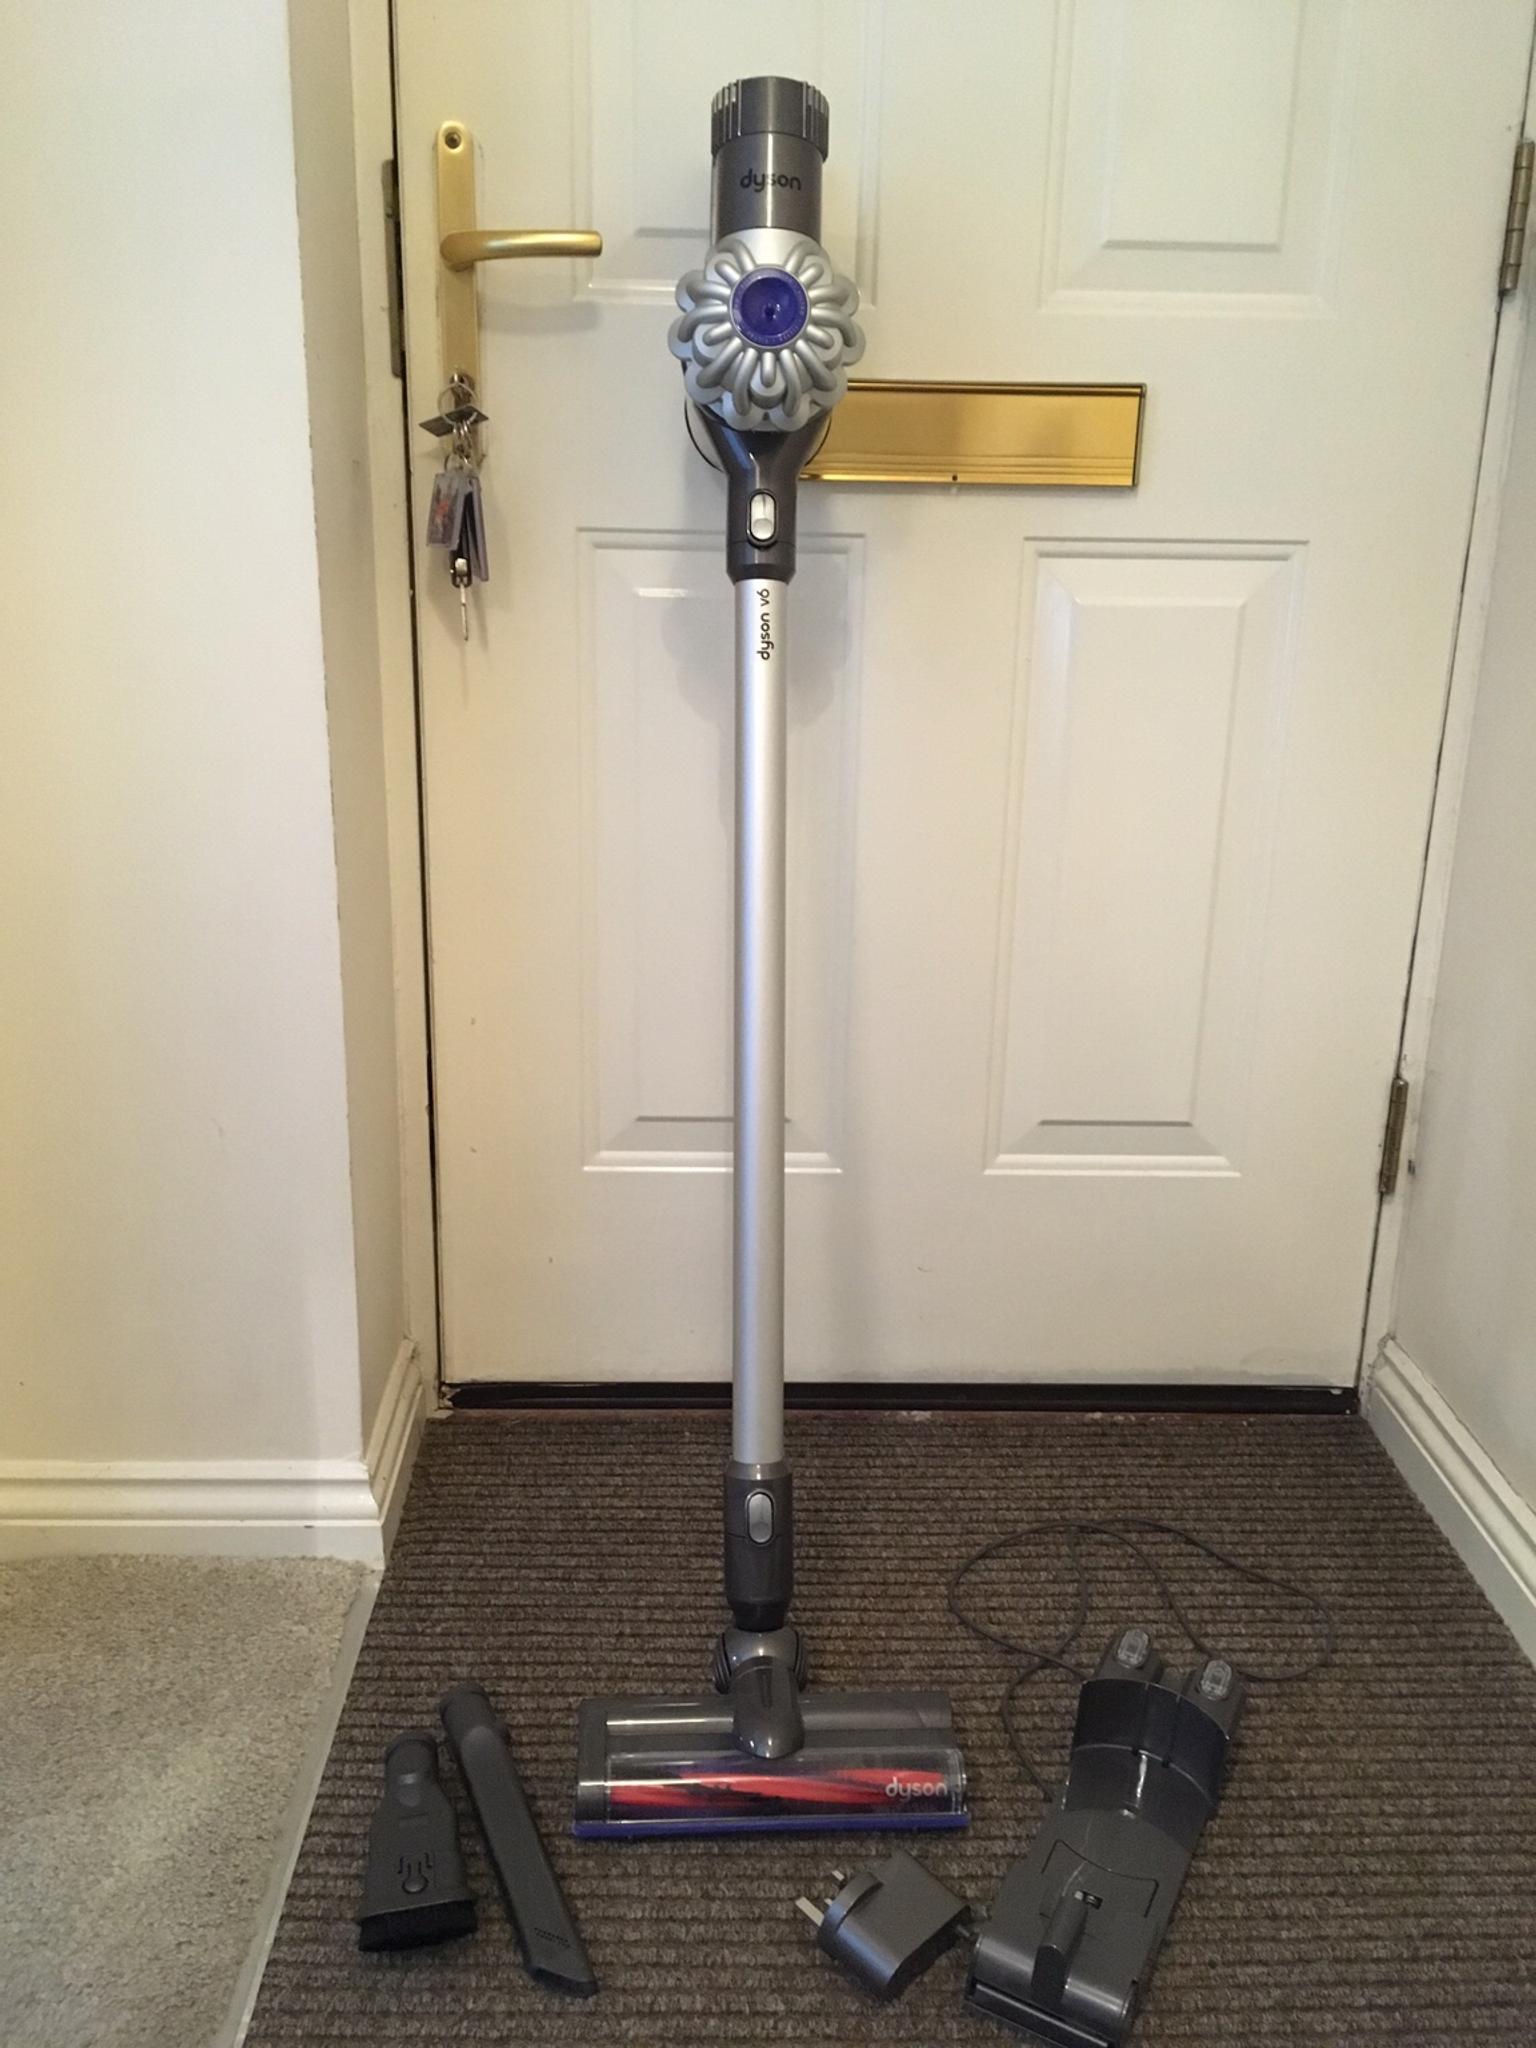 Dyson V6 Cordless Vacuum In Cv11 Nuneaton And Bedworth Fur 50 00